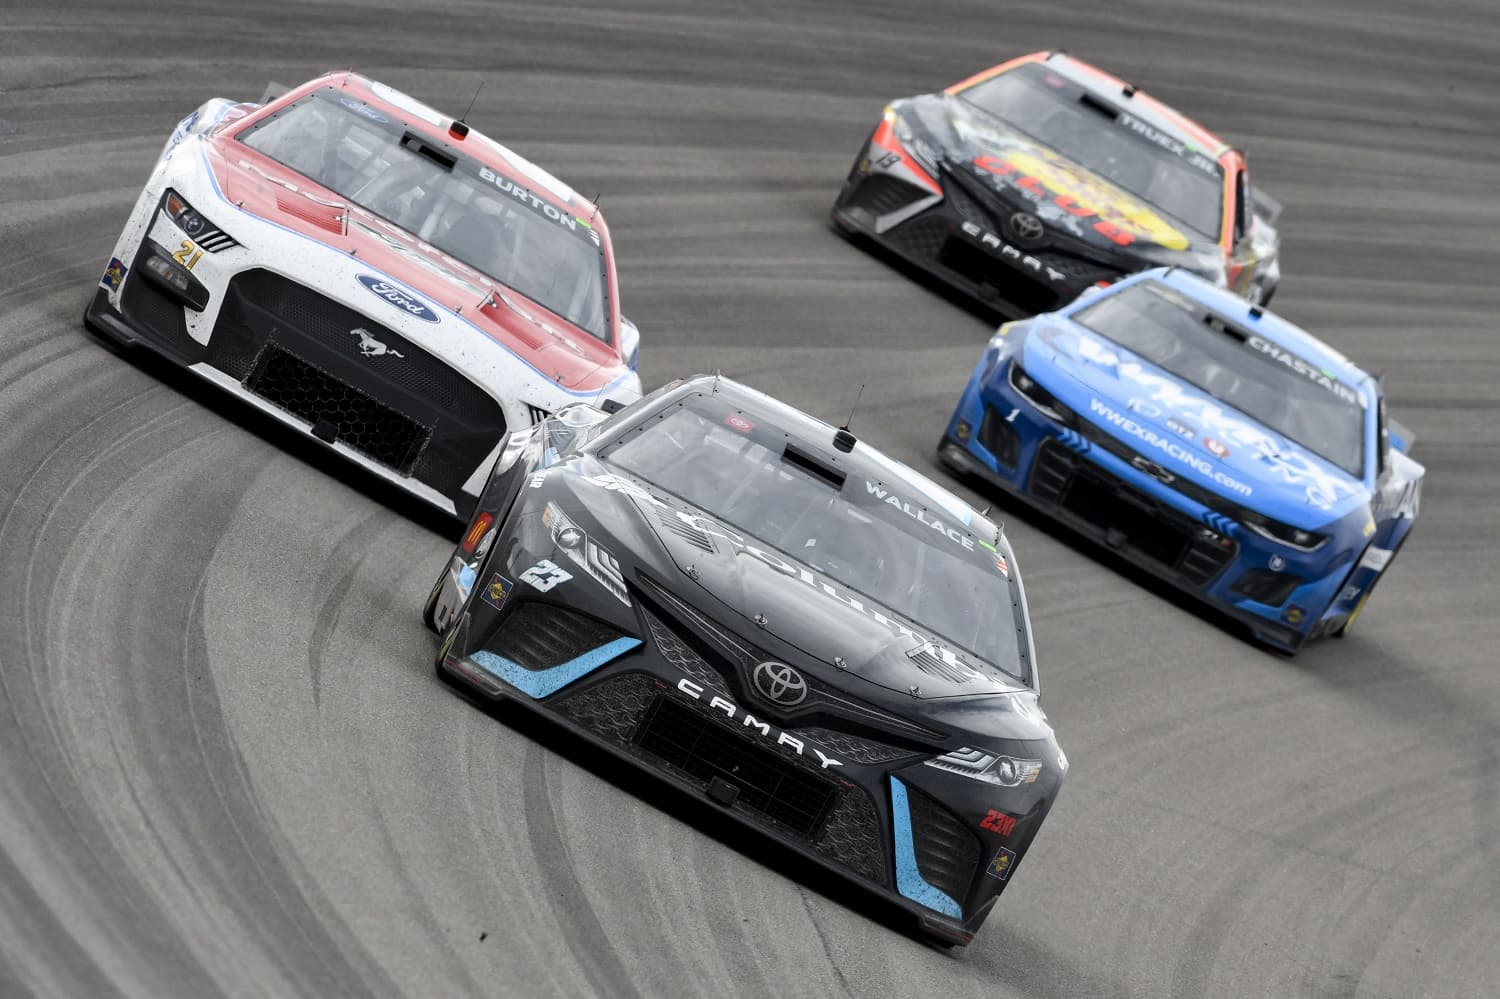 Bubba Wallace leads Harrison Burton, Ross Chastain, and Martin Truex Jr during the NASCAR Cup Series Pennzoil 400 on March 5, 2023, at Las Vegas Motor Speedway. | Michael Allio/Icon Sportswire via Getty Images